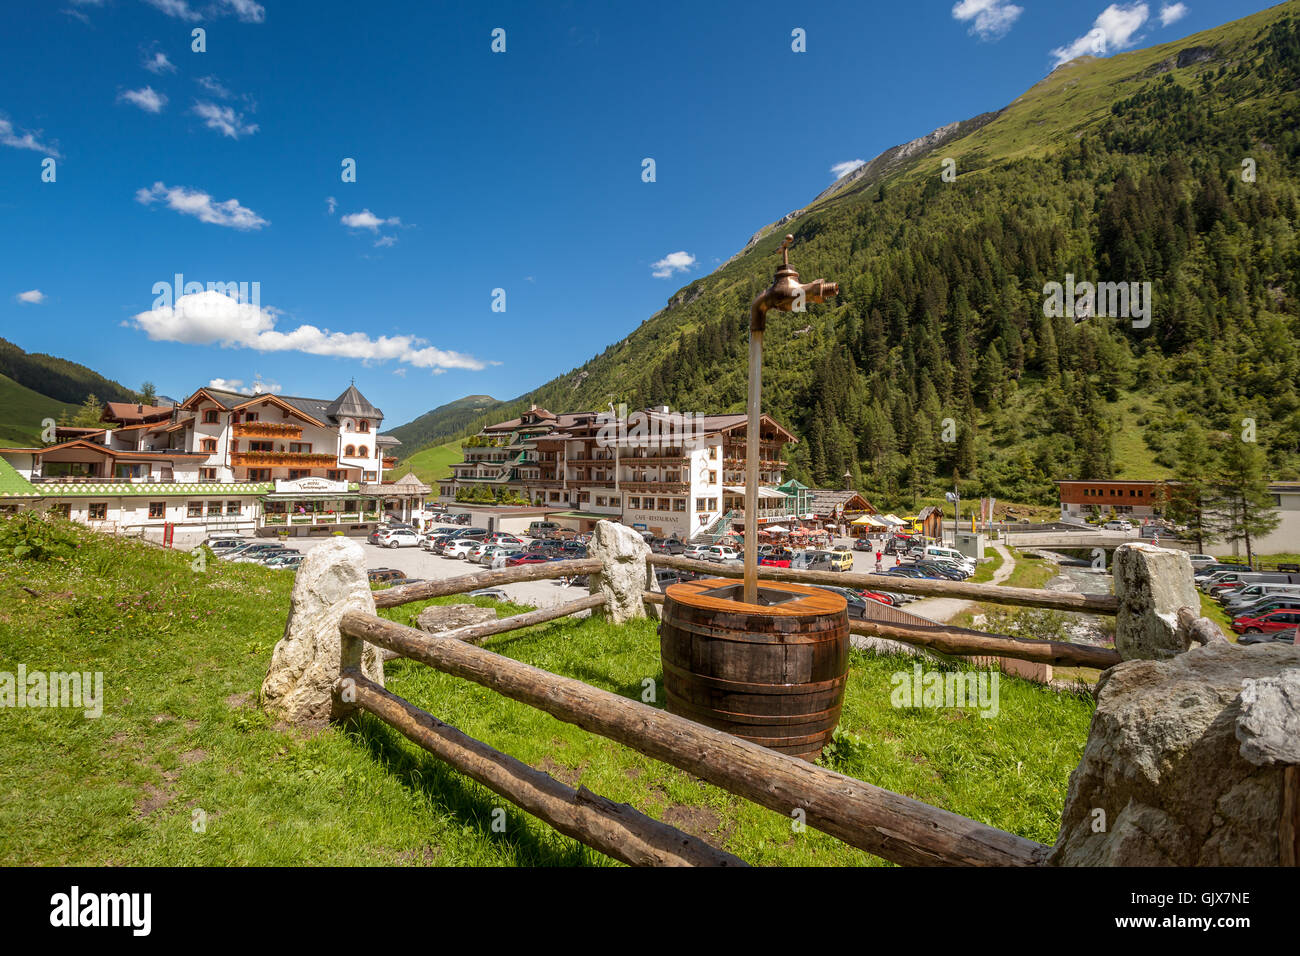 Natural spring water in Hintertux Austria Stock Photo